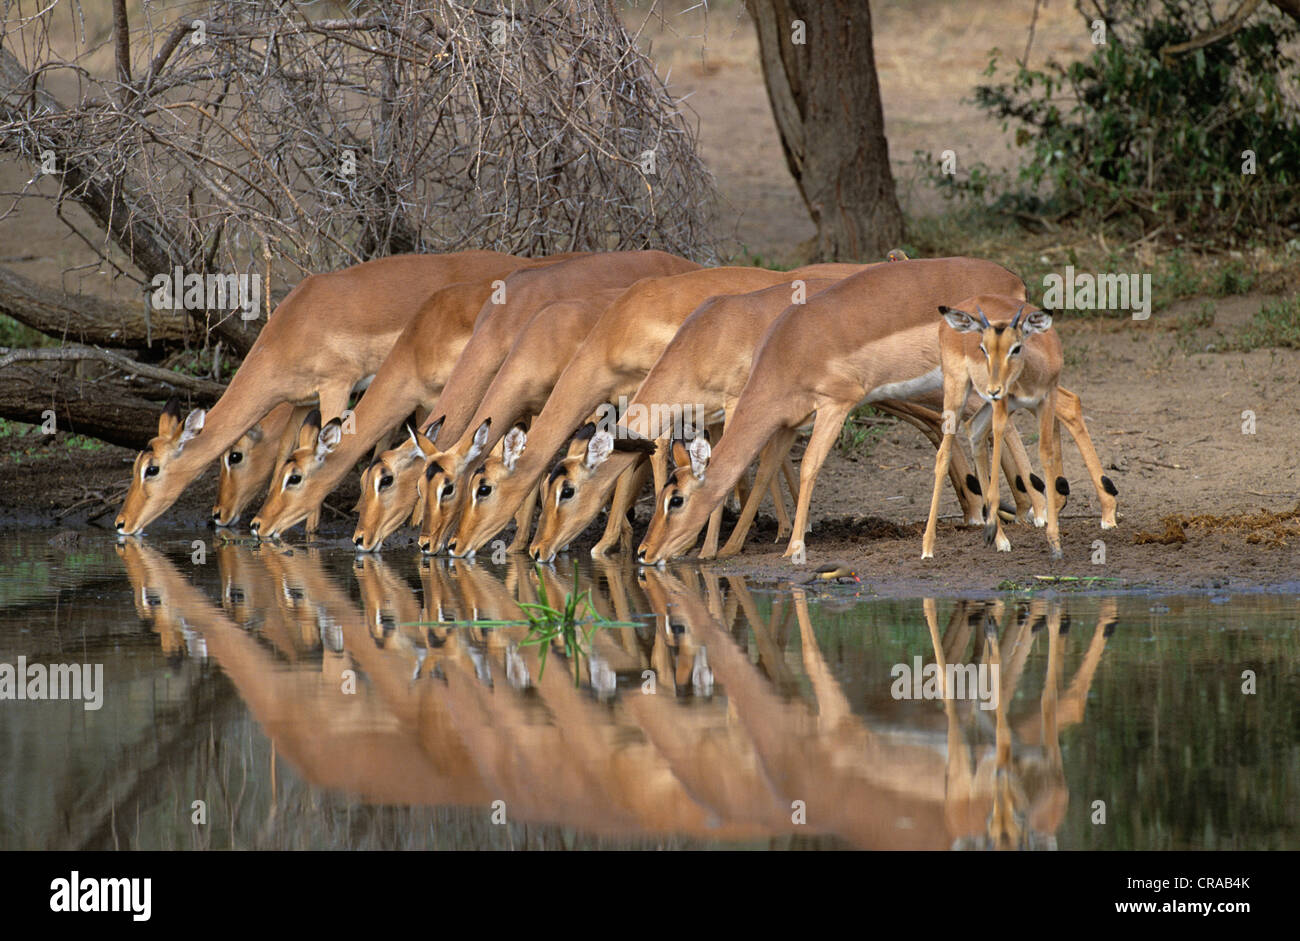 Impalas (Aepyceros melampus), in a row, drinking, Kruger National Park, South Africa Stock Photo